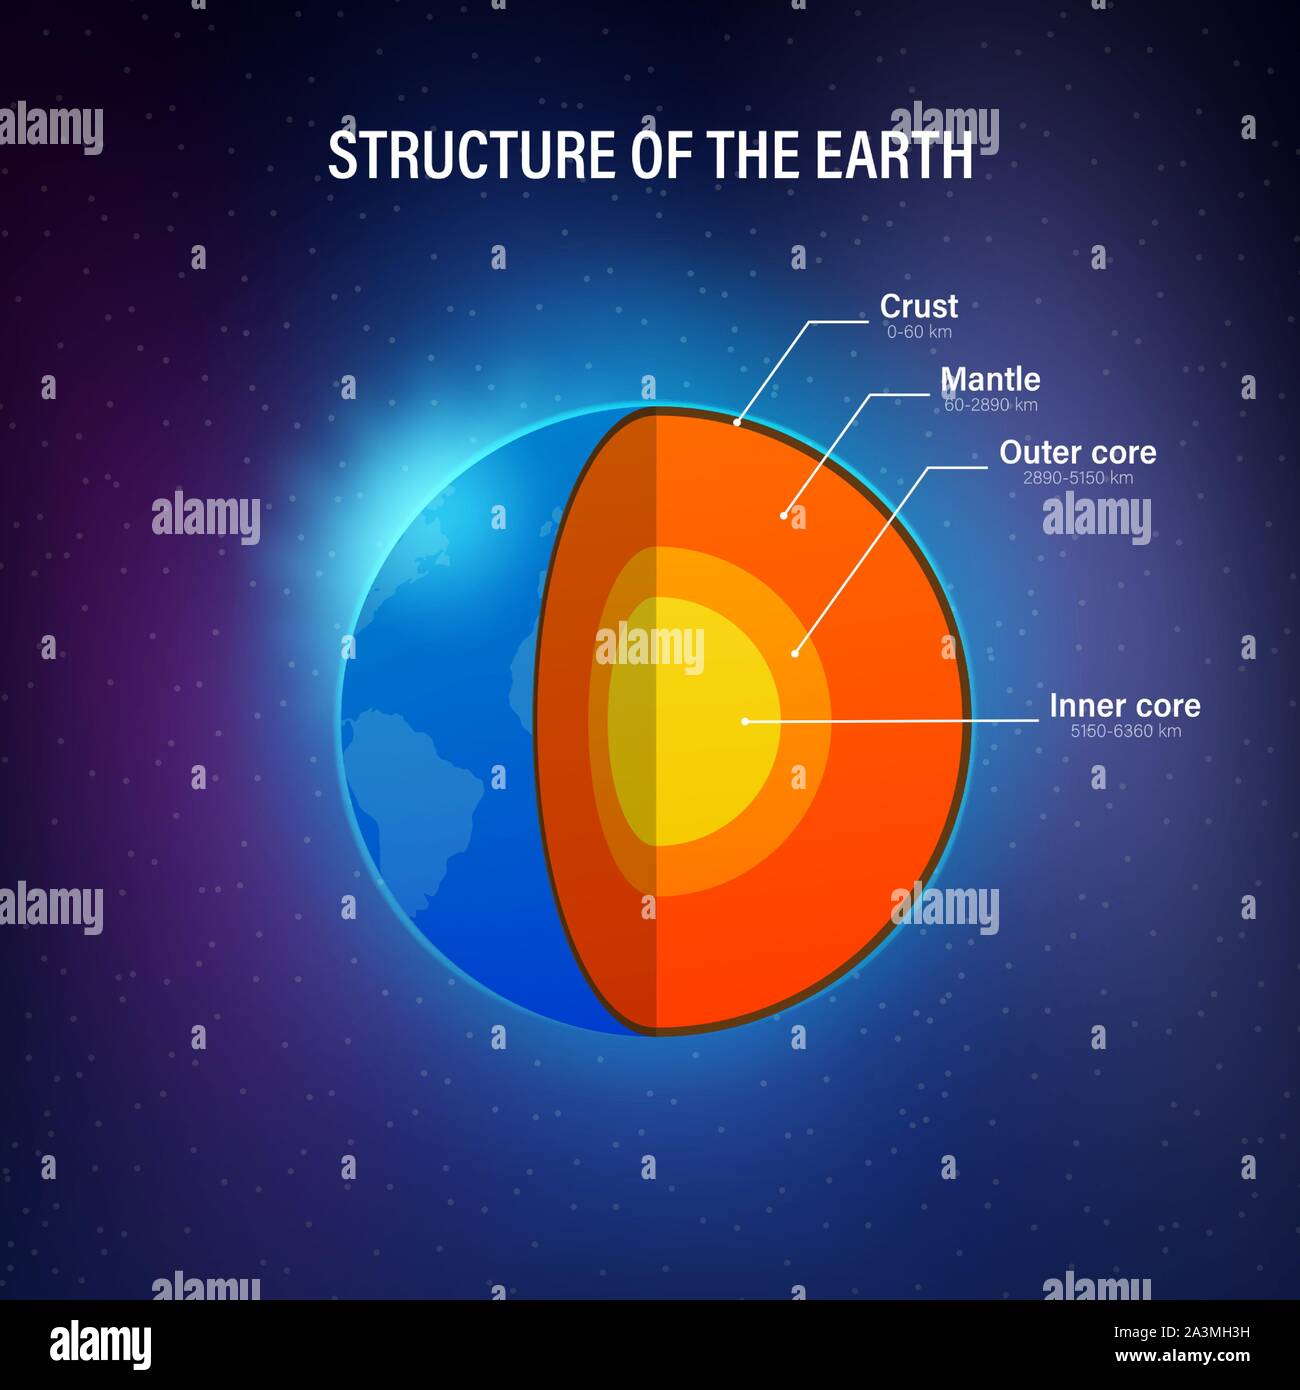 Structure of the earth - cross section with accurate layers of the earth's interior, description, depth in kilometers. Vector illustration. Stock Vector